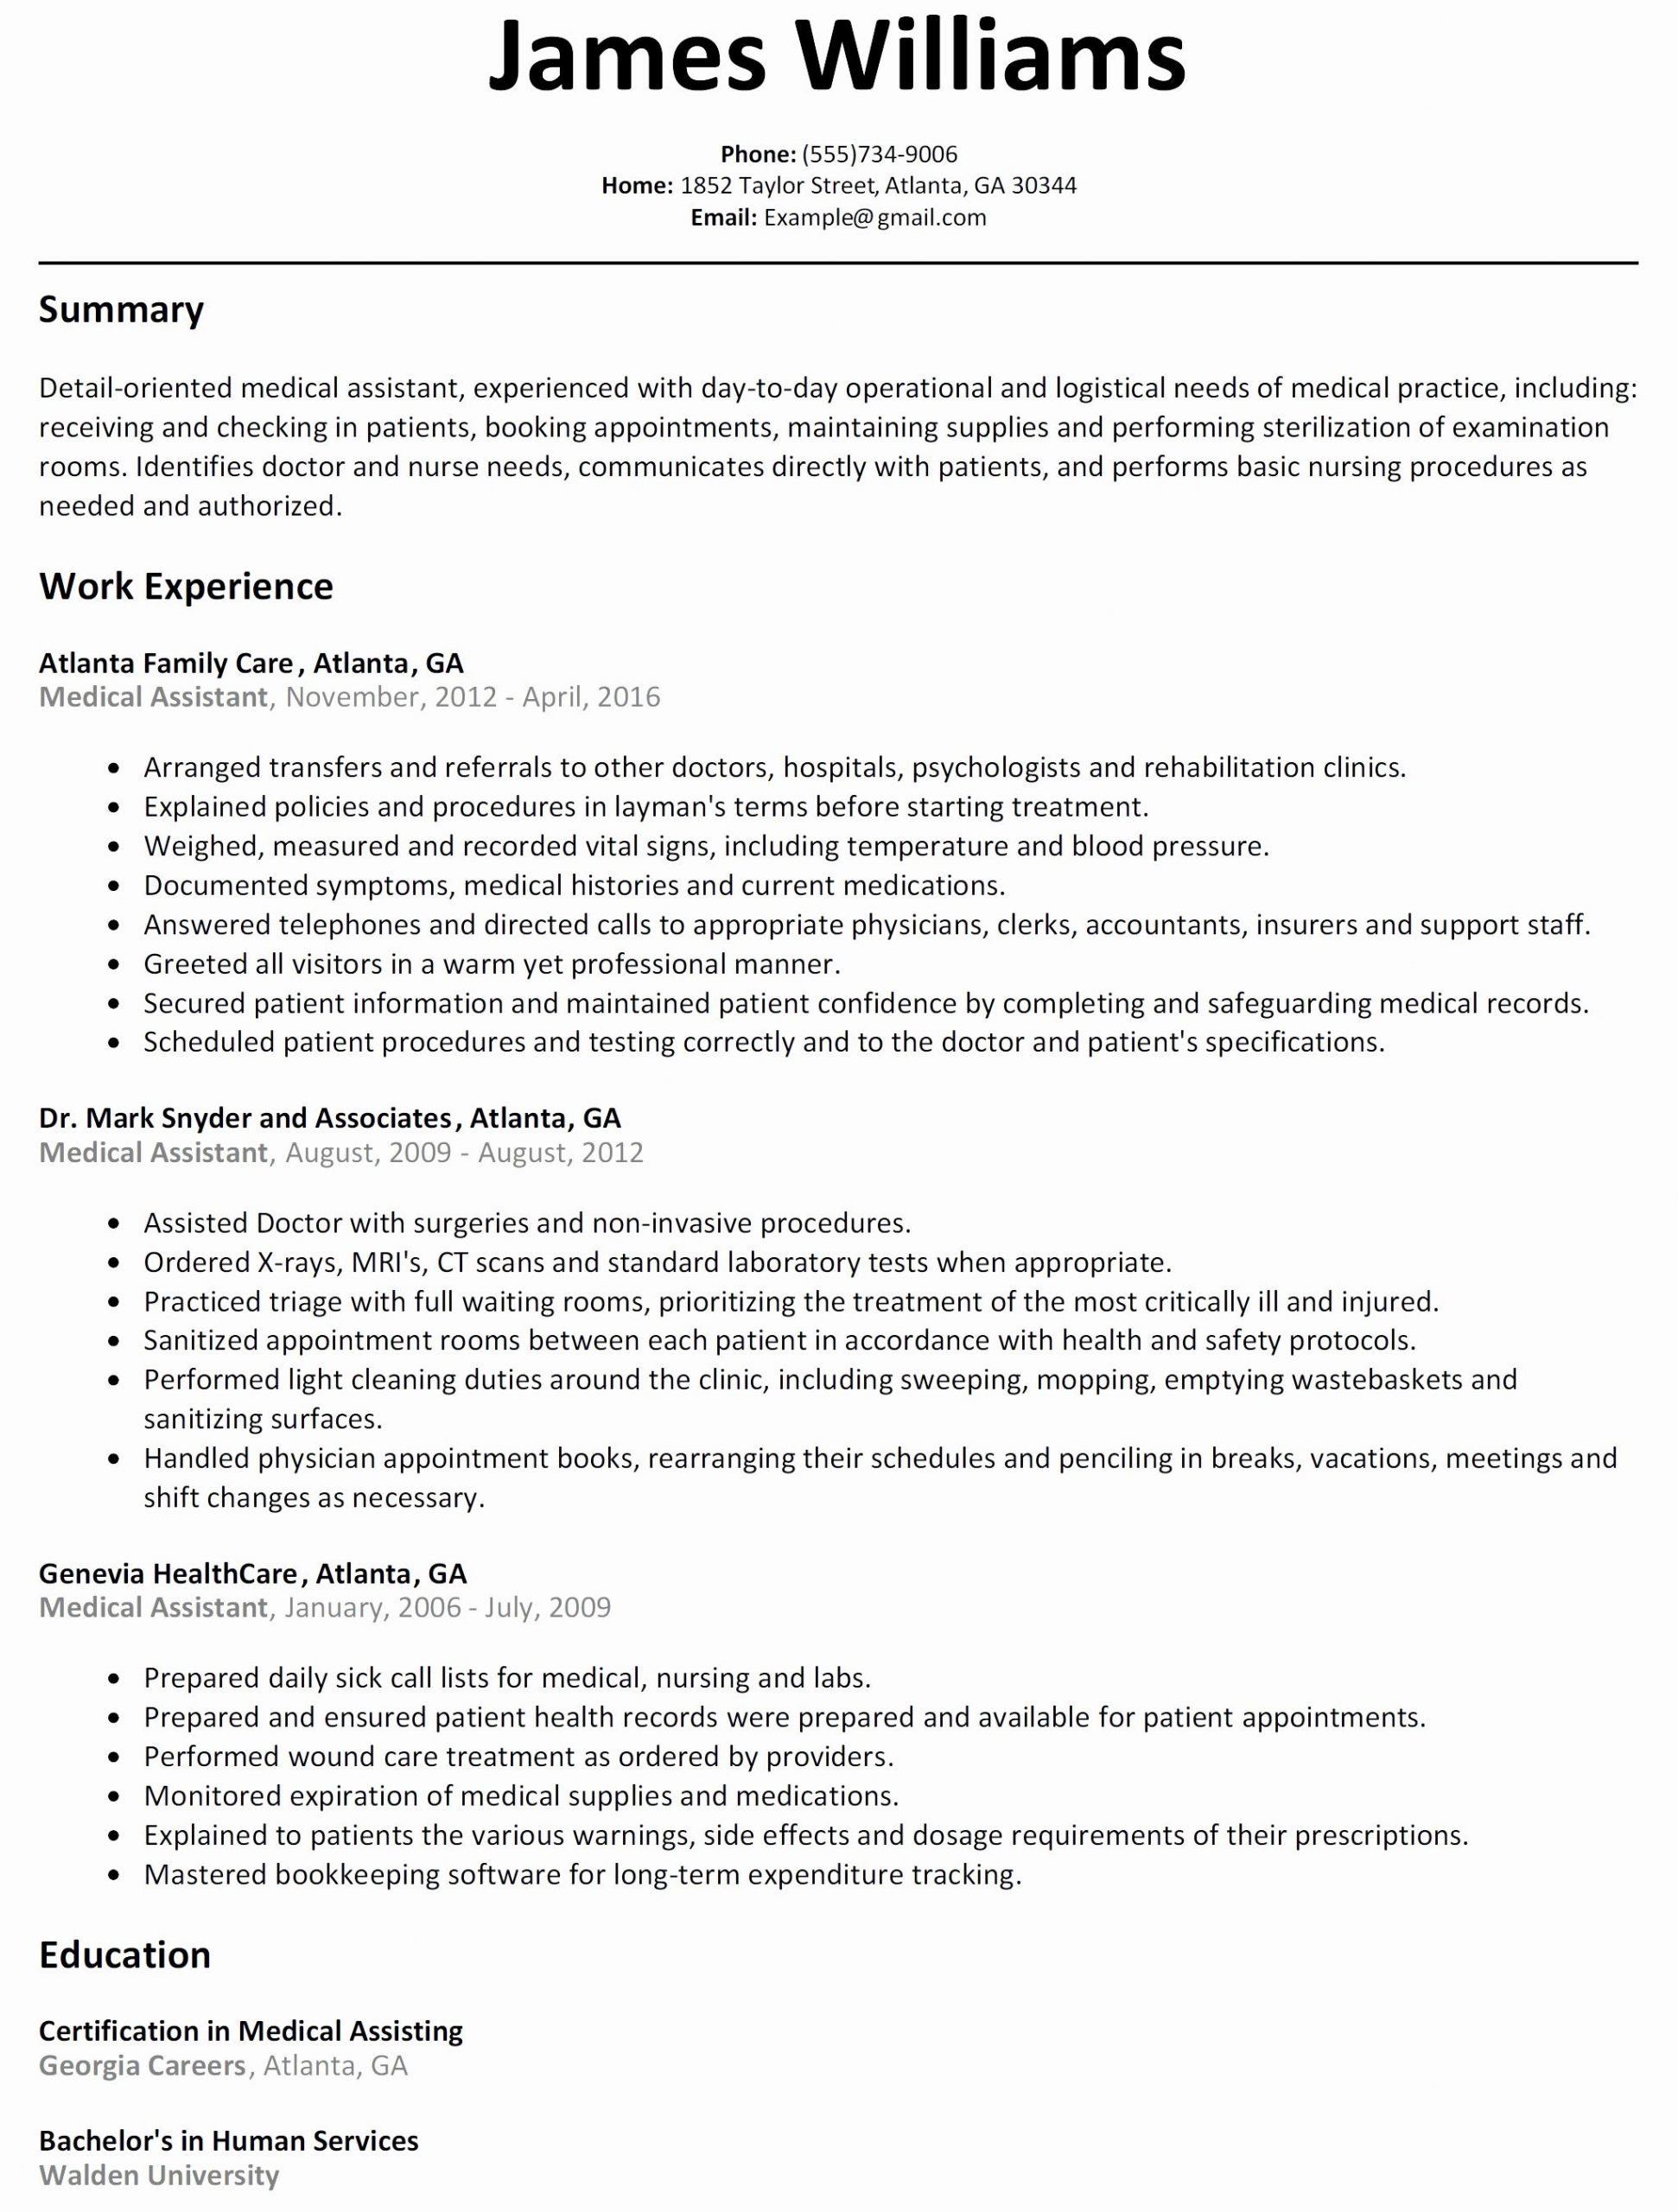 11 Freelance Writer Resume Template Collection